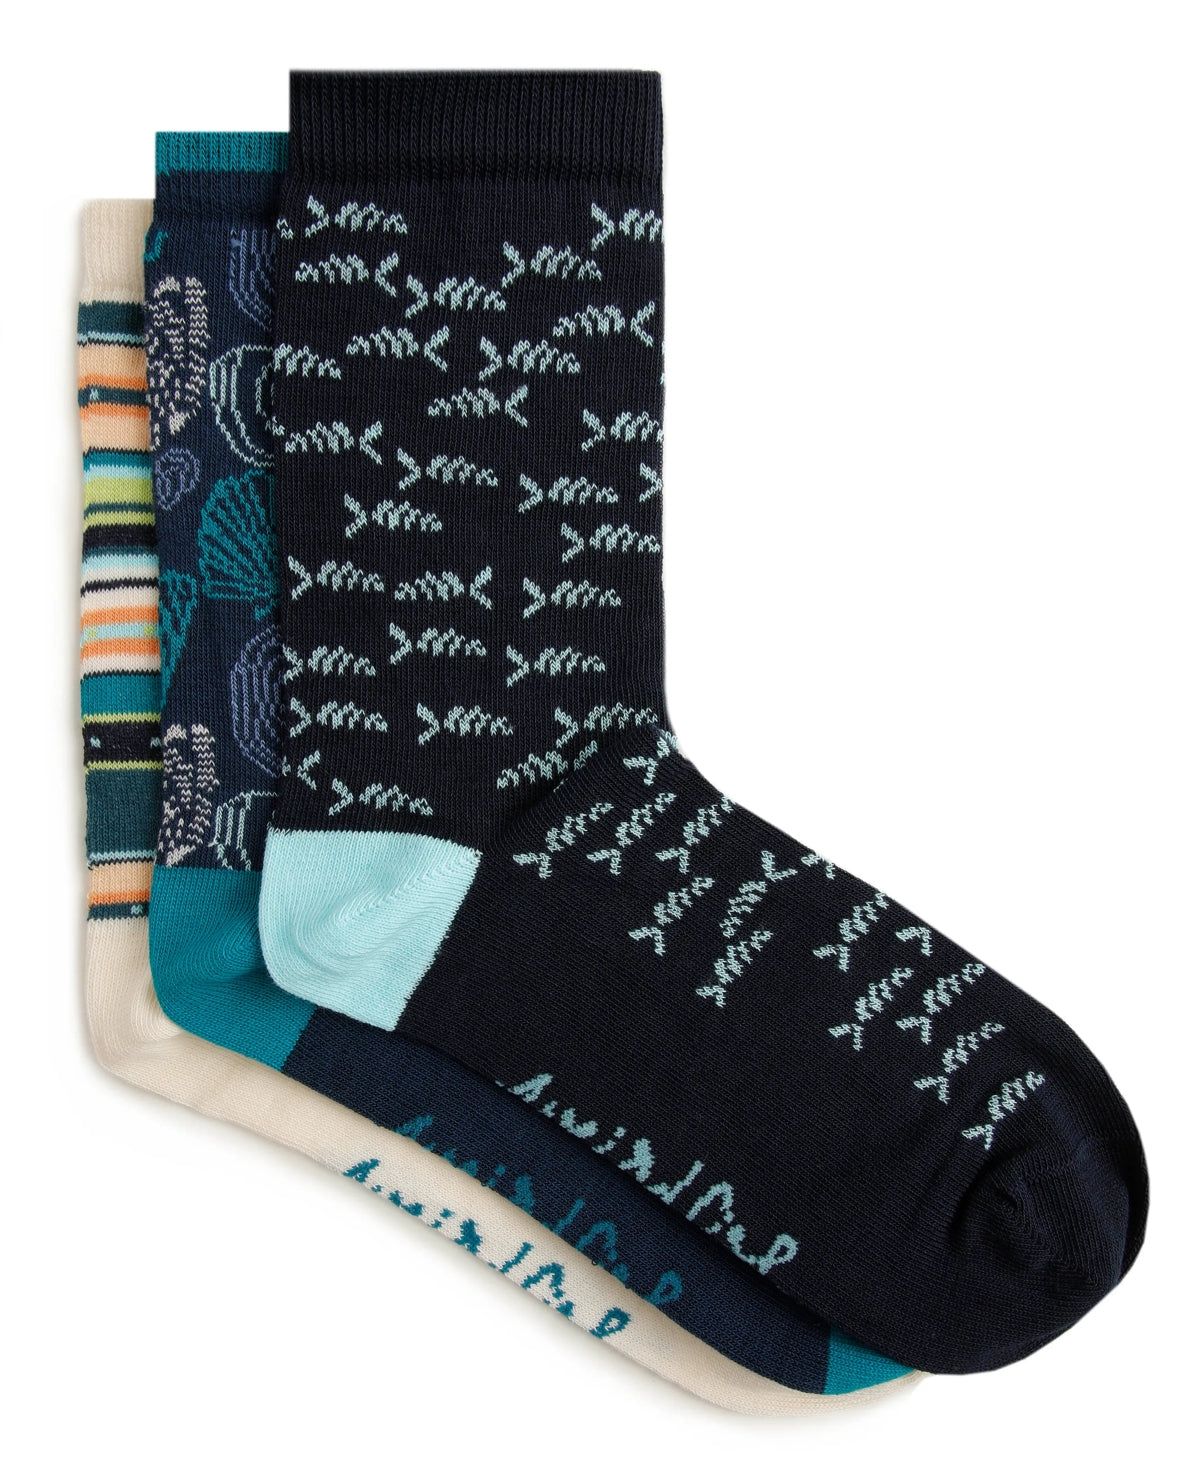 Weird Fish women's Parade three pack of cotton blend socks with fish, stripe and shell patterns.